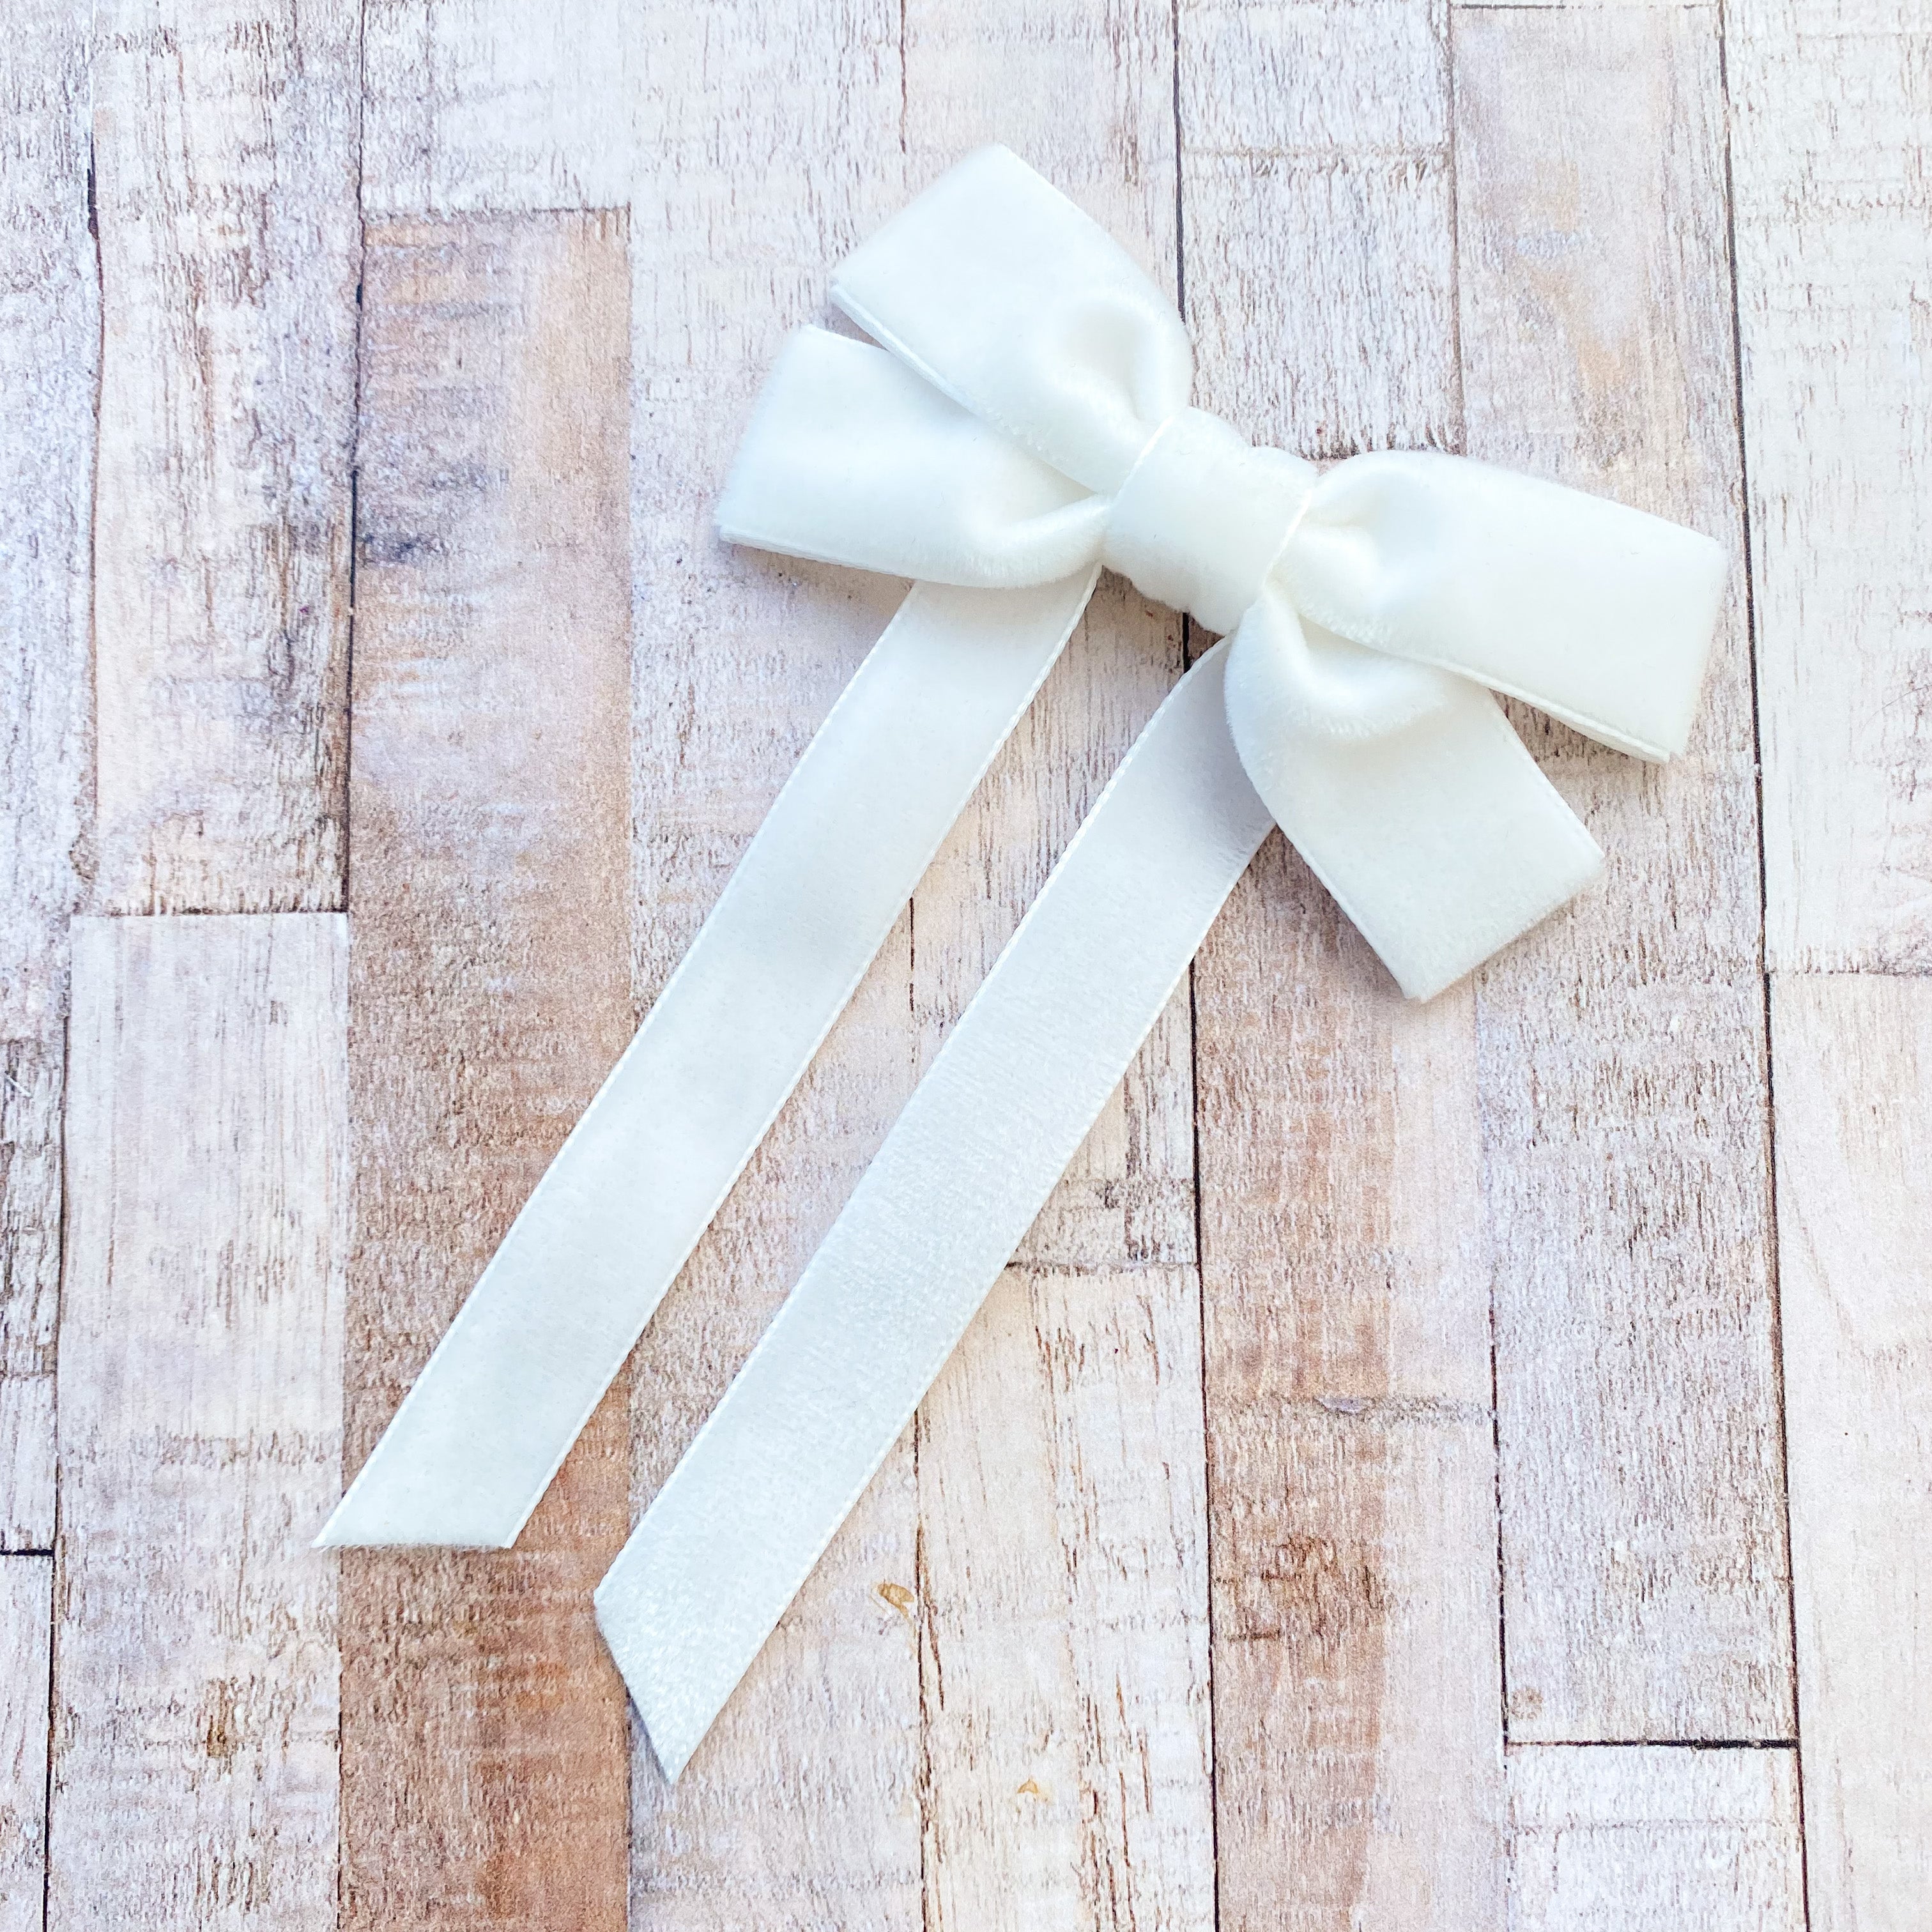 Fable Petite Velvet hair bow in pale Ivory, perfect for everyday, and special occasions, ivory velvet hair bow, ivory velvet hair bow, velvet hair bow uk, ivory flower girl bow, ivory velvet bow clip, ivory bow for flower girl, velvet bow hair clip in ivory, long velvet hair bow in ivory